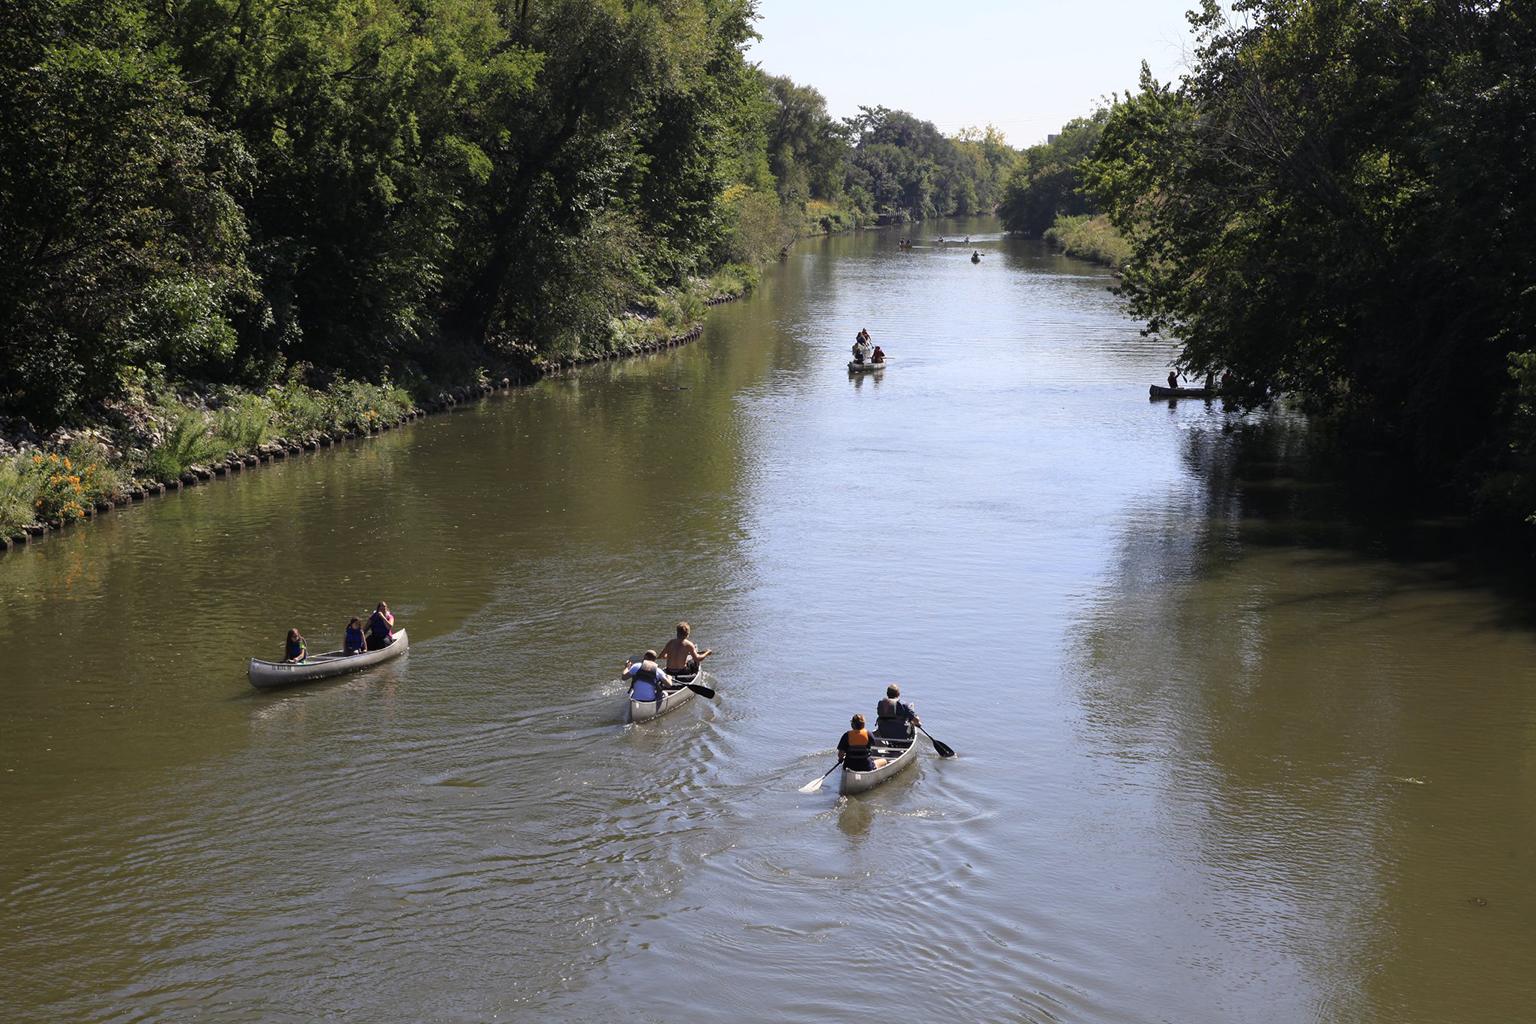 Kayakers on the North Branch of the Chicago River in Horner Park. (Courtesy U.S. Army Corps of Engineers)